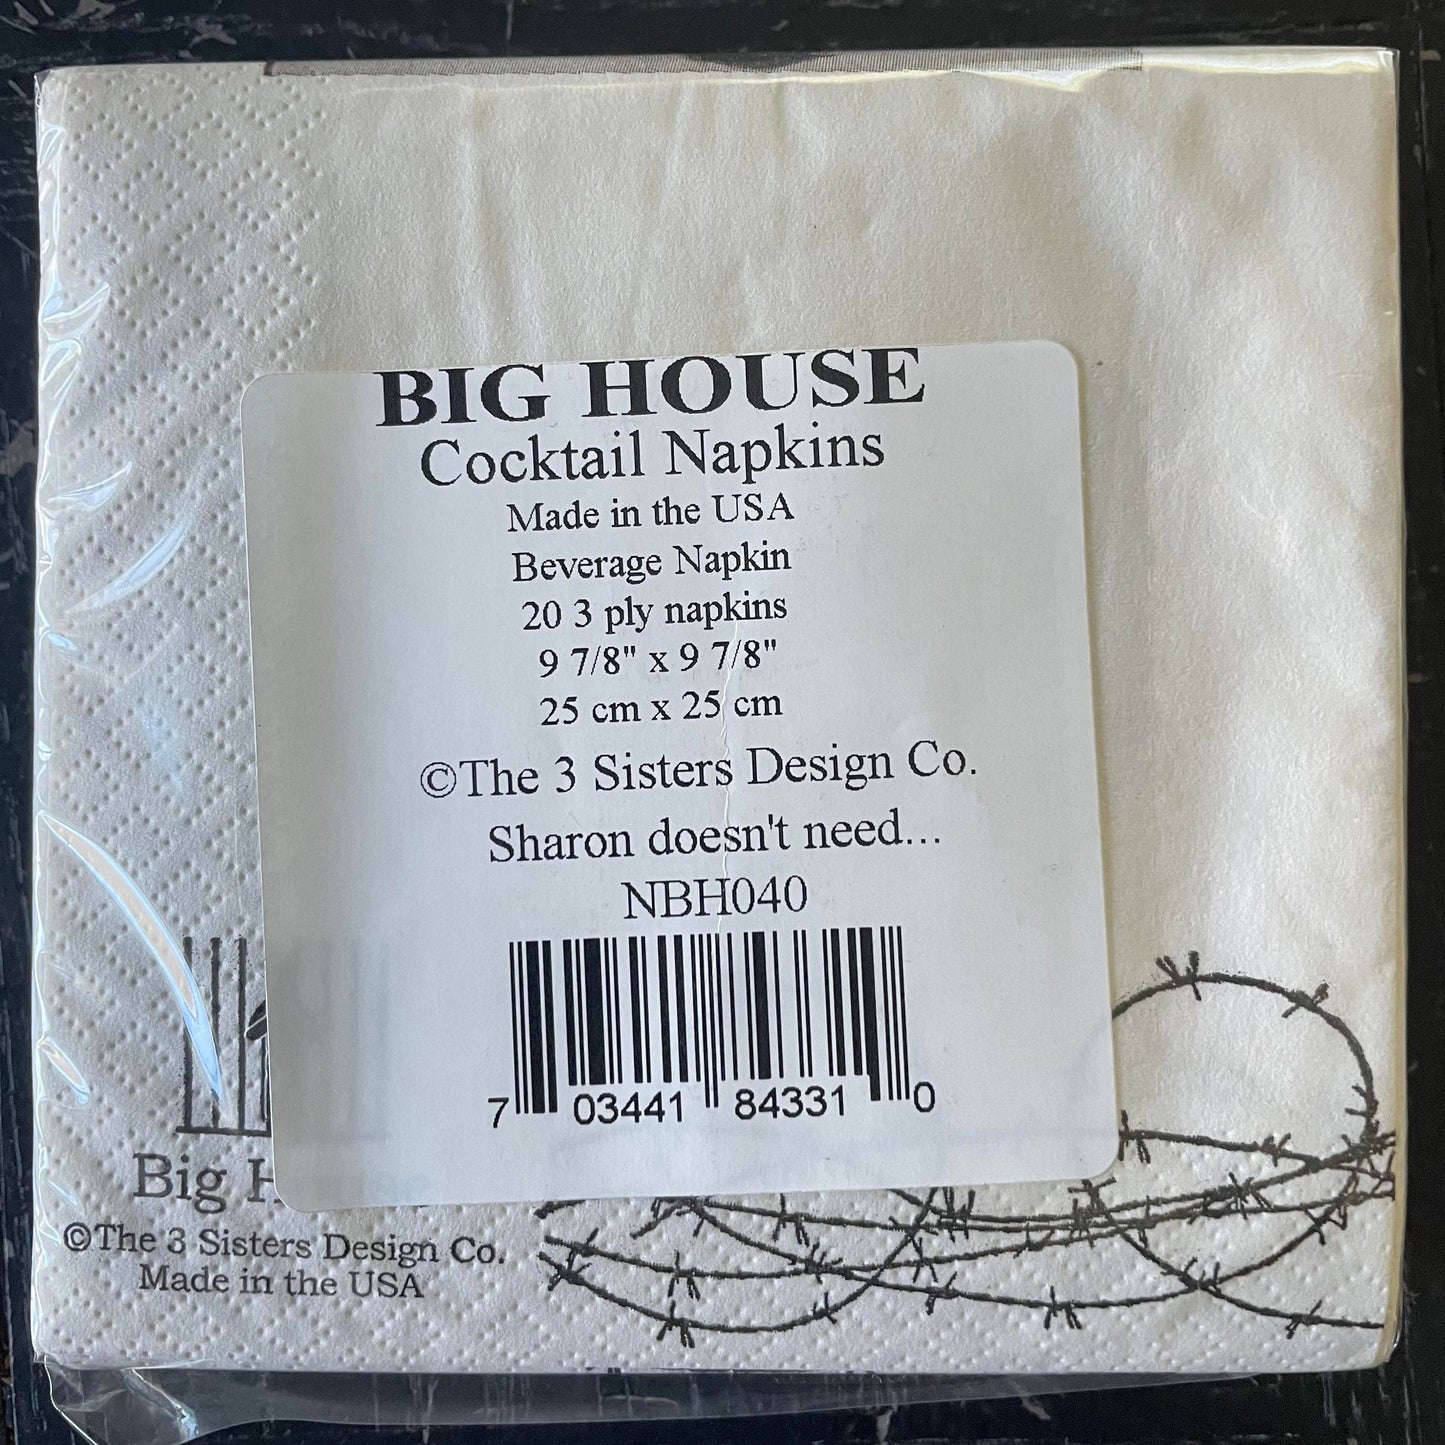 Big House Cocktail Napkins, Sharon doesn't need alcohol...